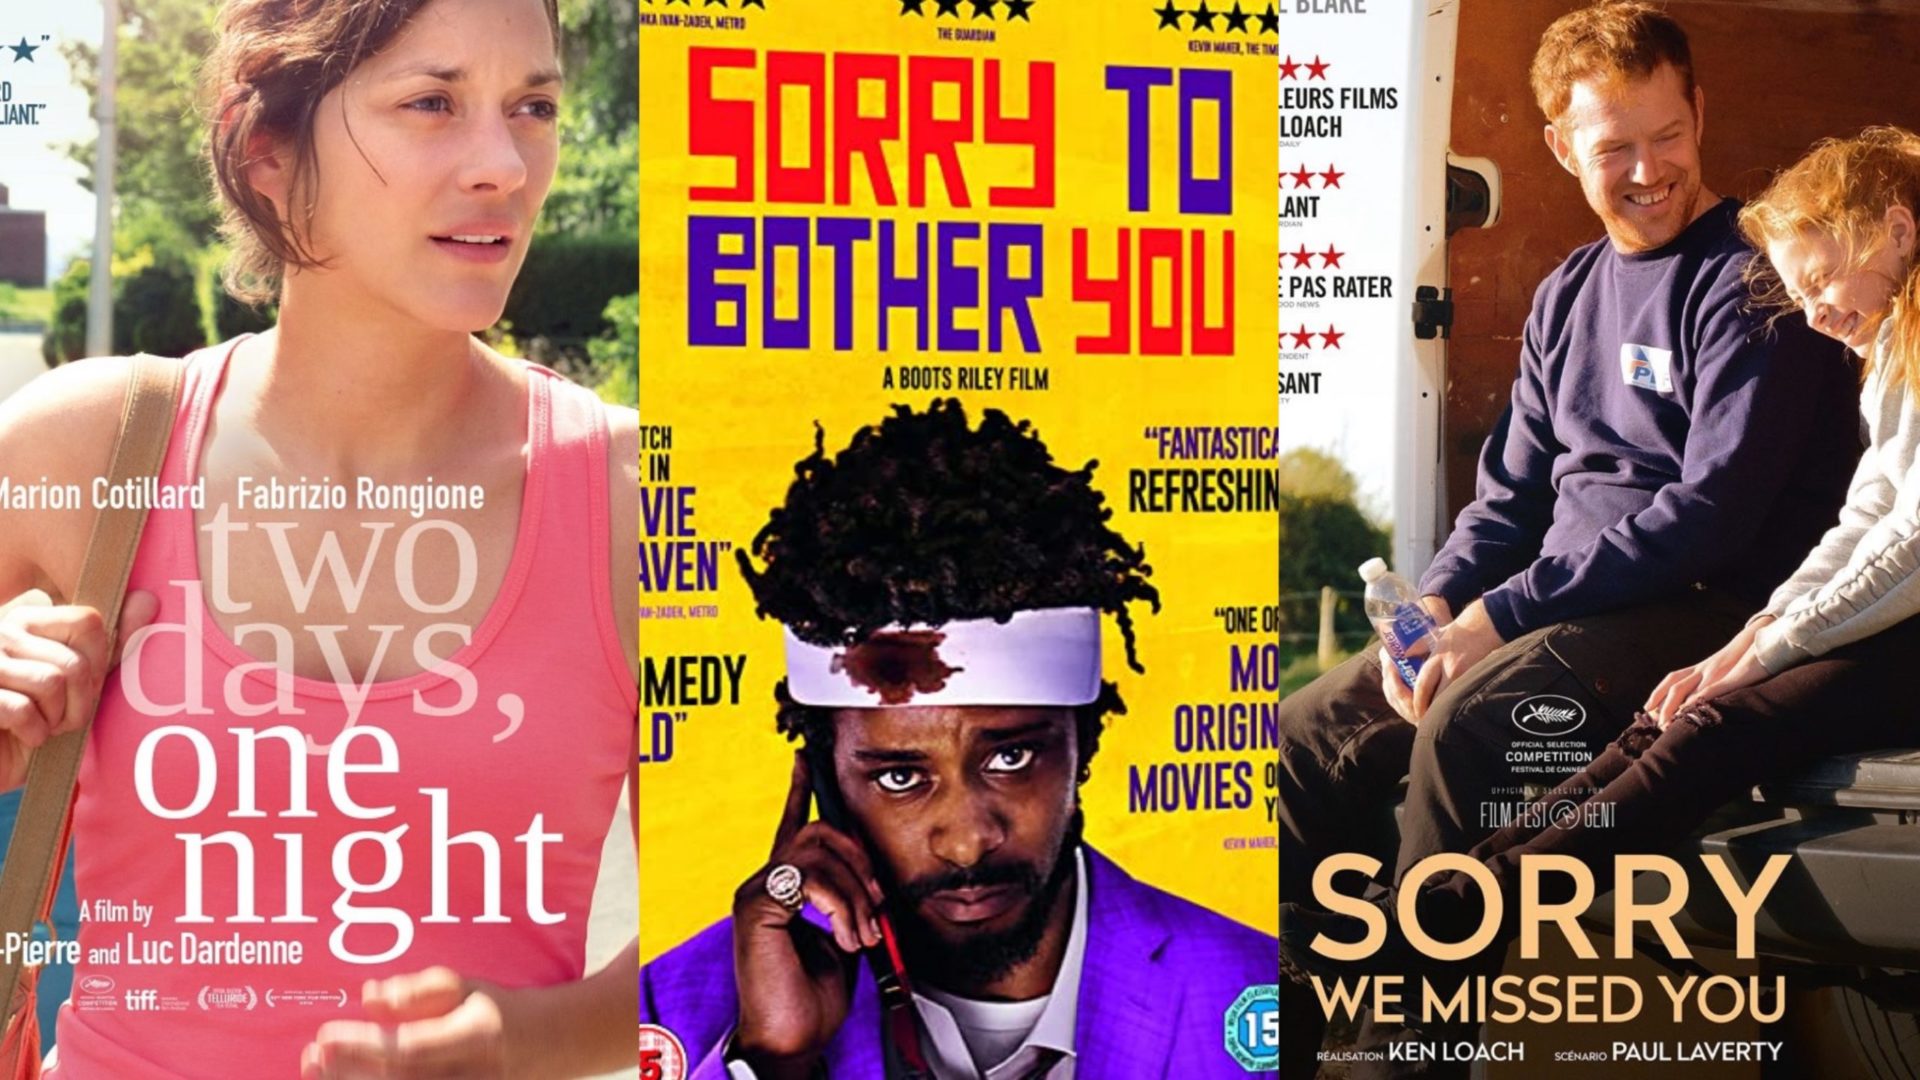 Hollywood Insider Review, Films on Labor, Sorry To Bother You, Two Days One Night, Marion Cottilard, Sorry We Missed You